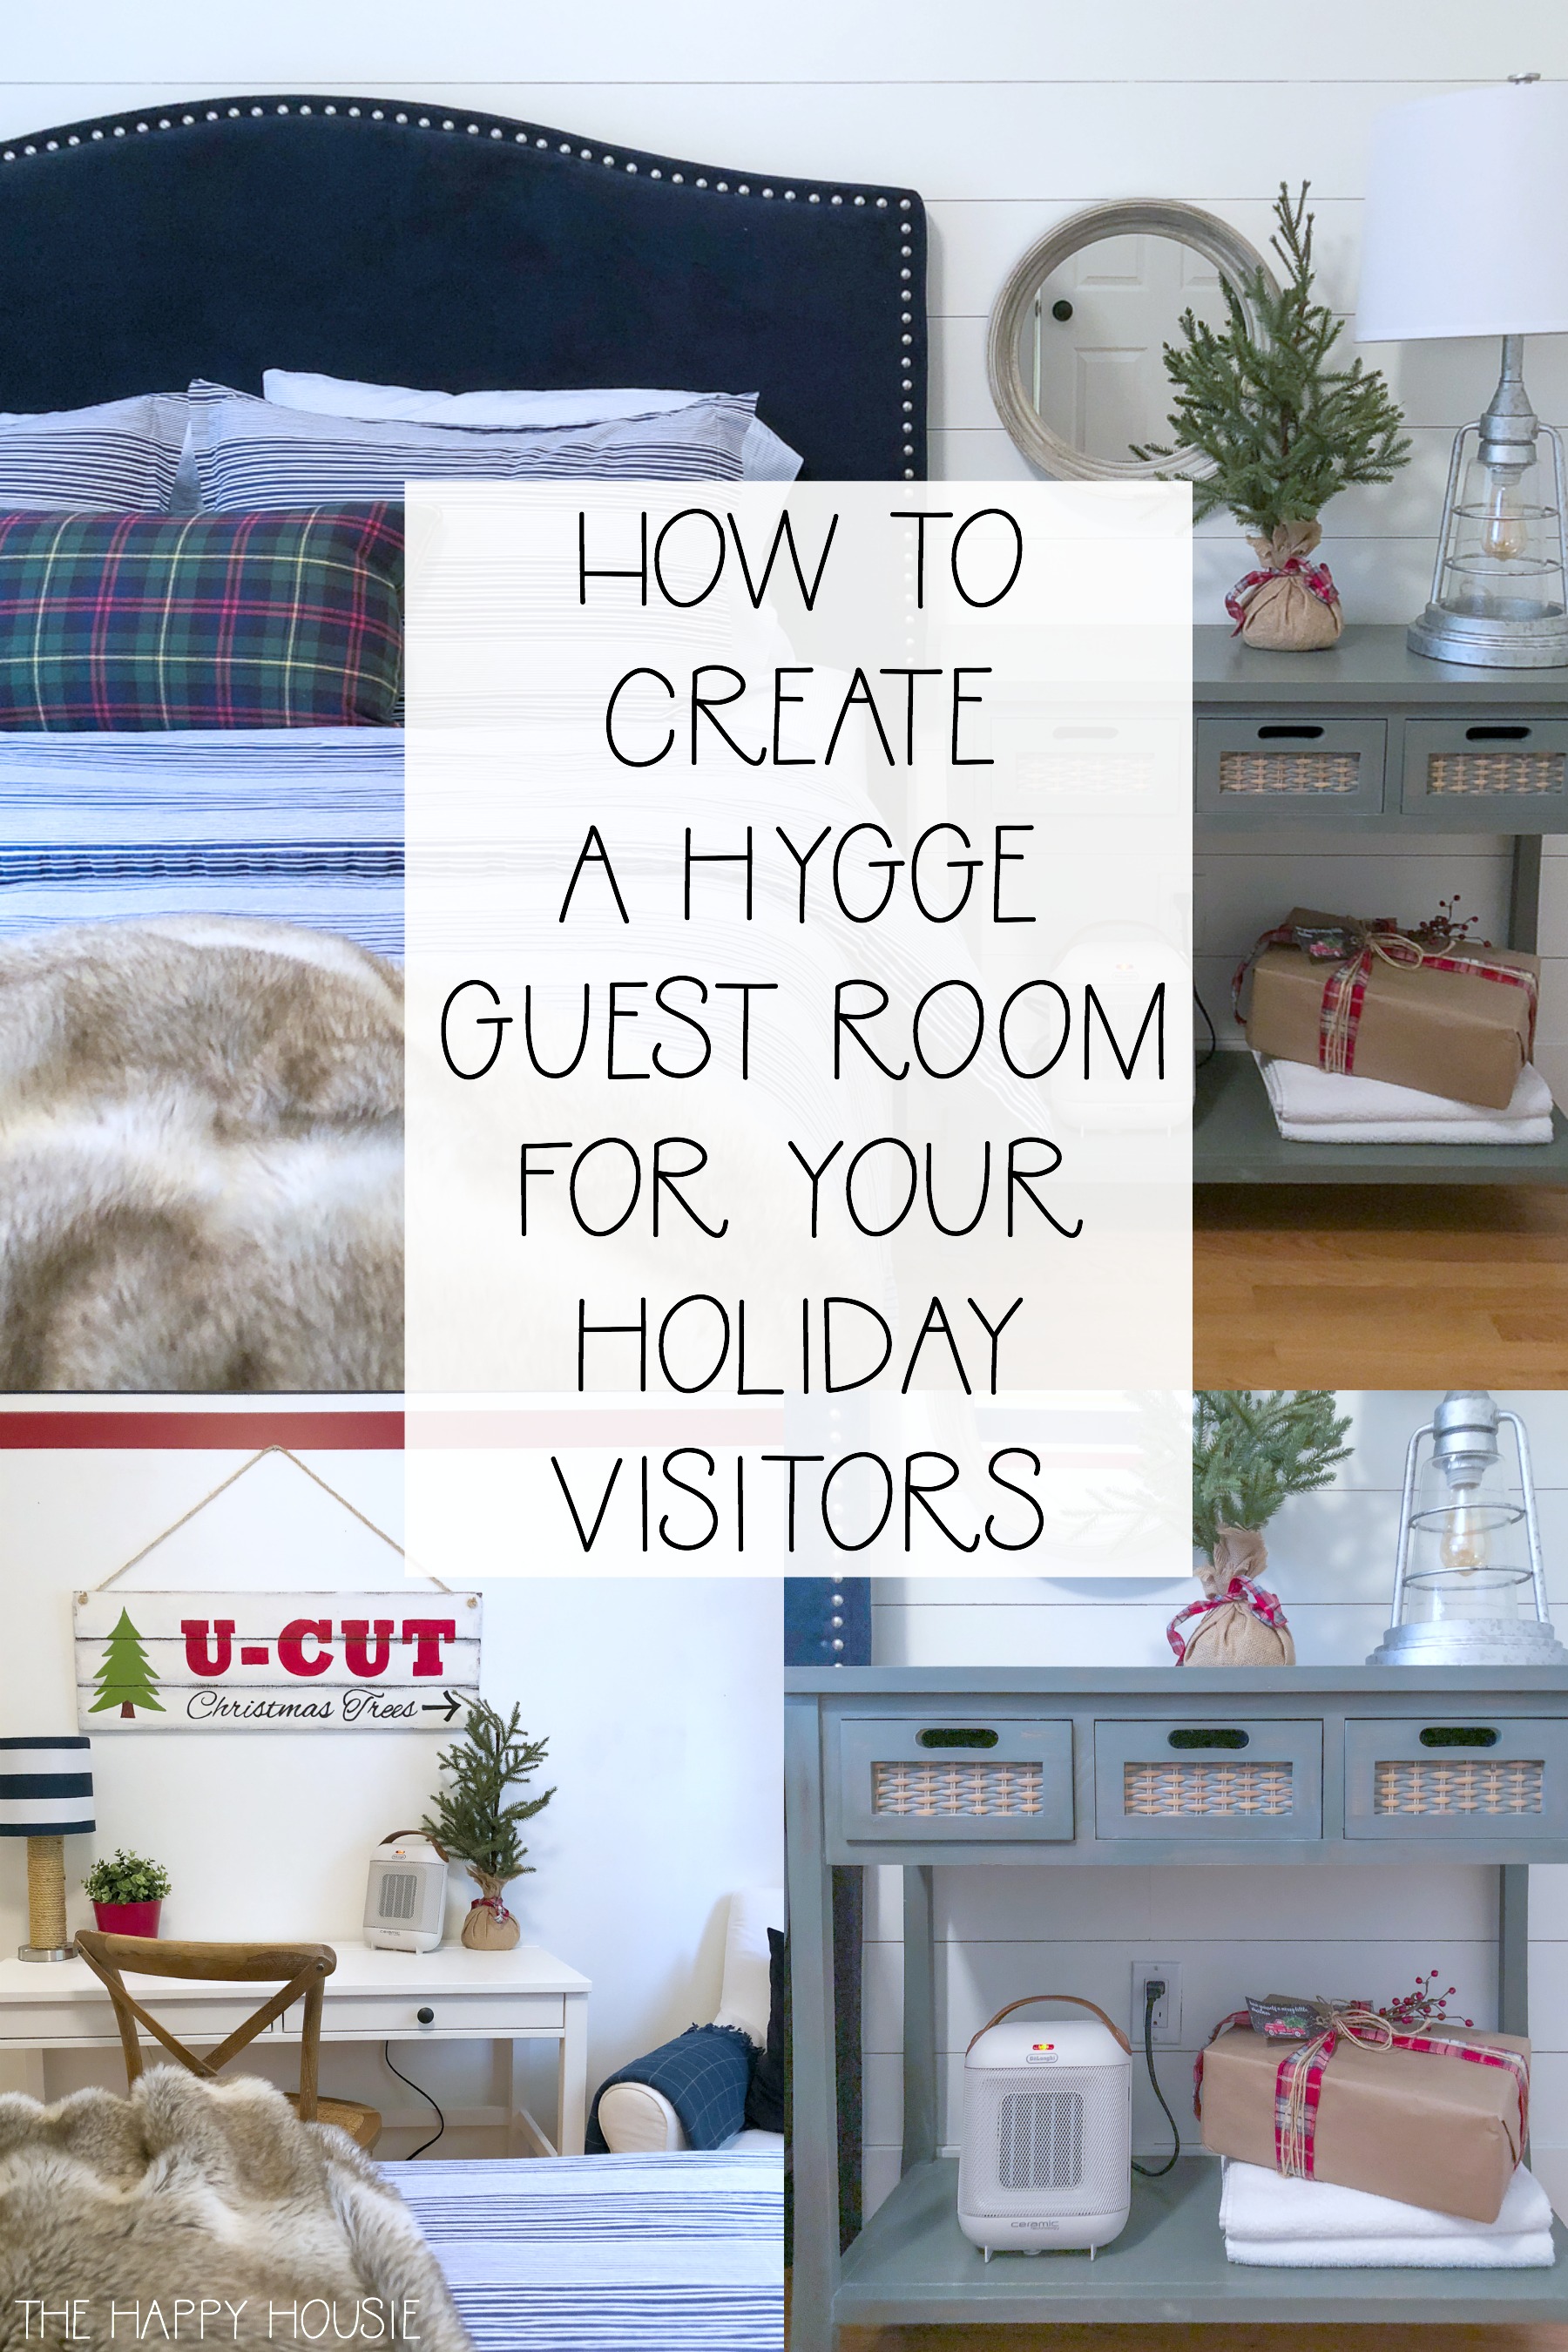 How To Create A Hygge Guest Room For Your Holiday Visitors poster.